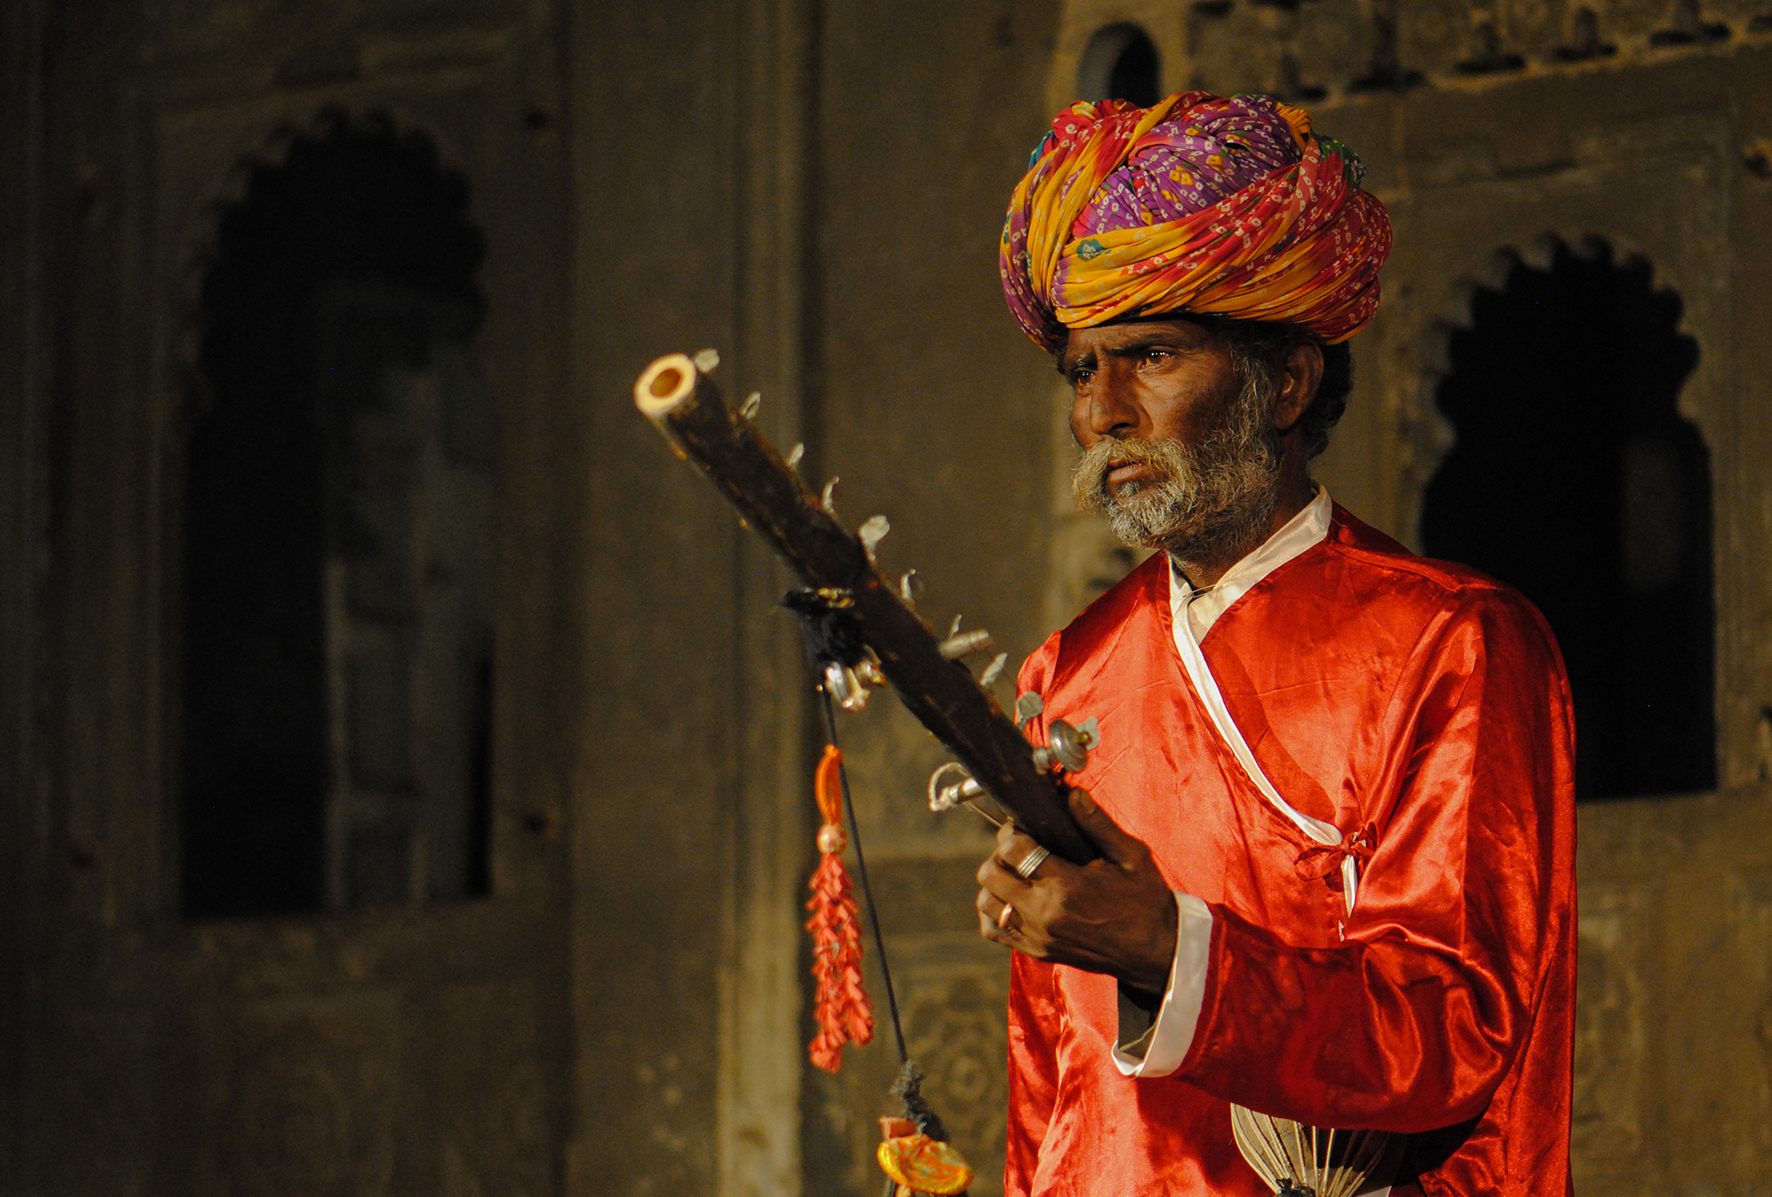 Dancers are accompanied by an elder sarangi player—a traditional instrument.